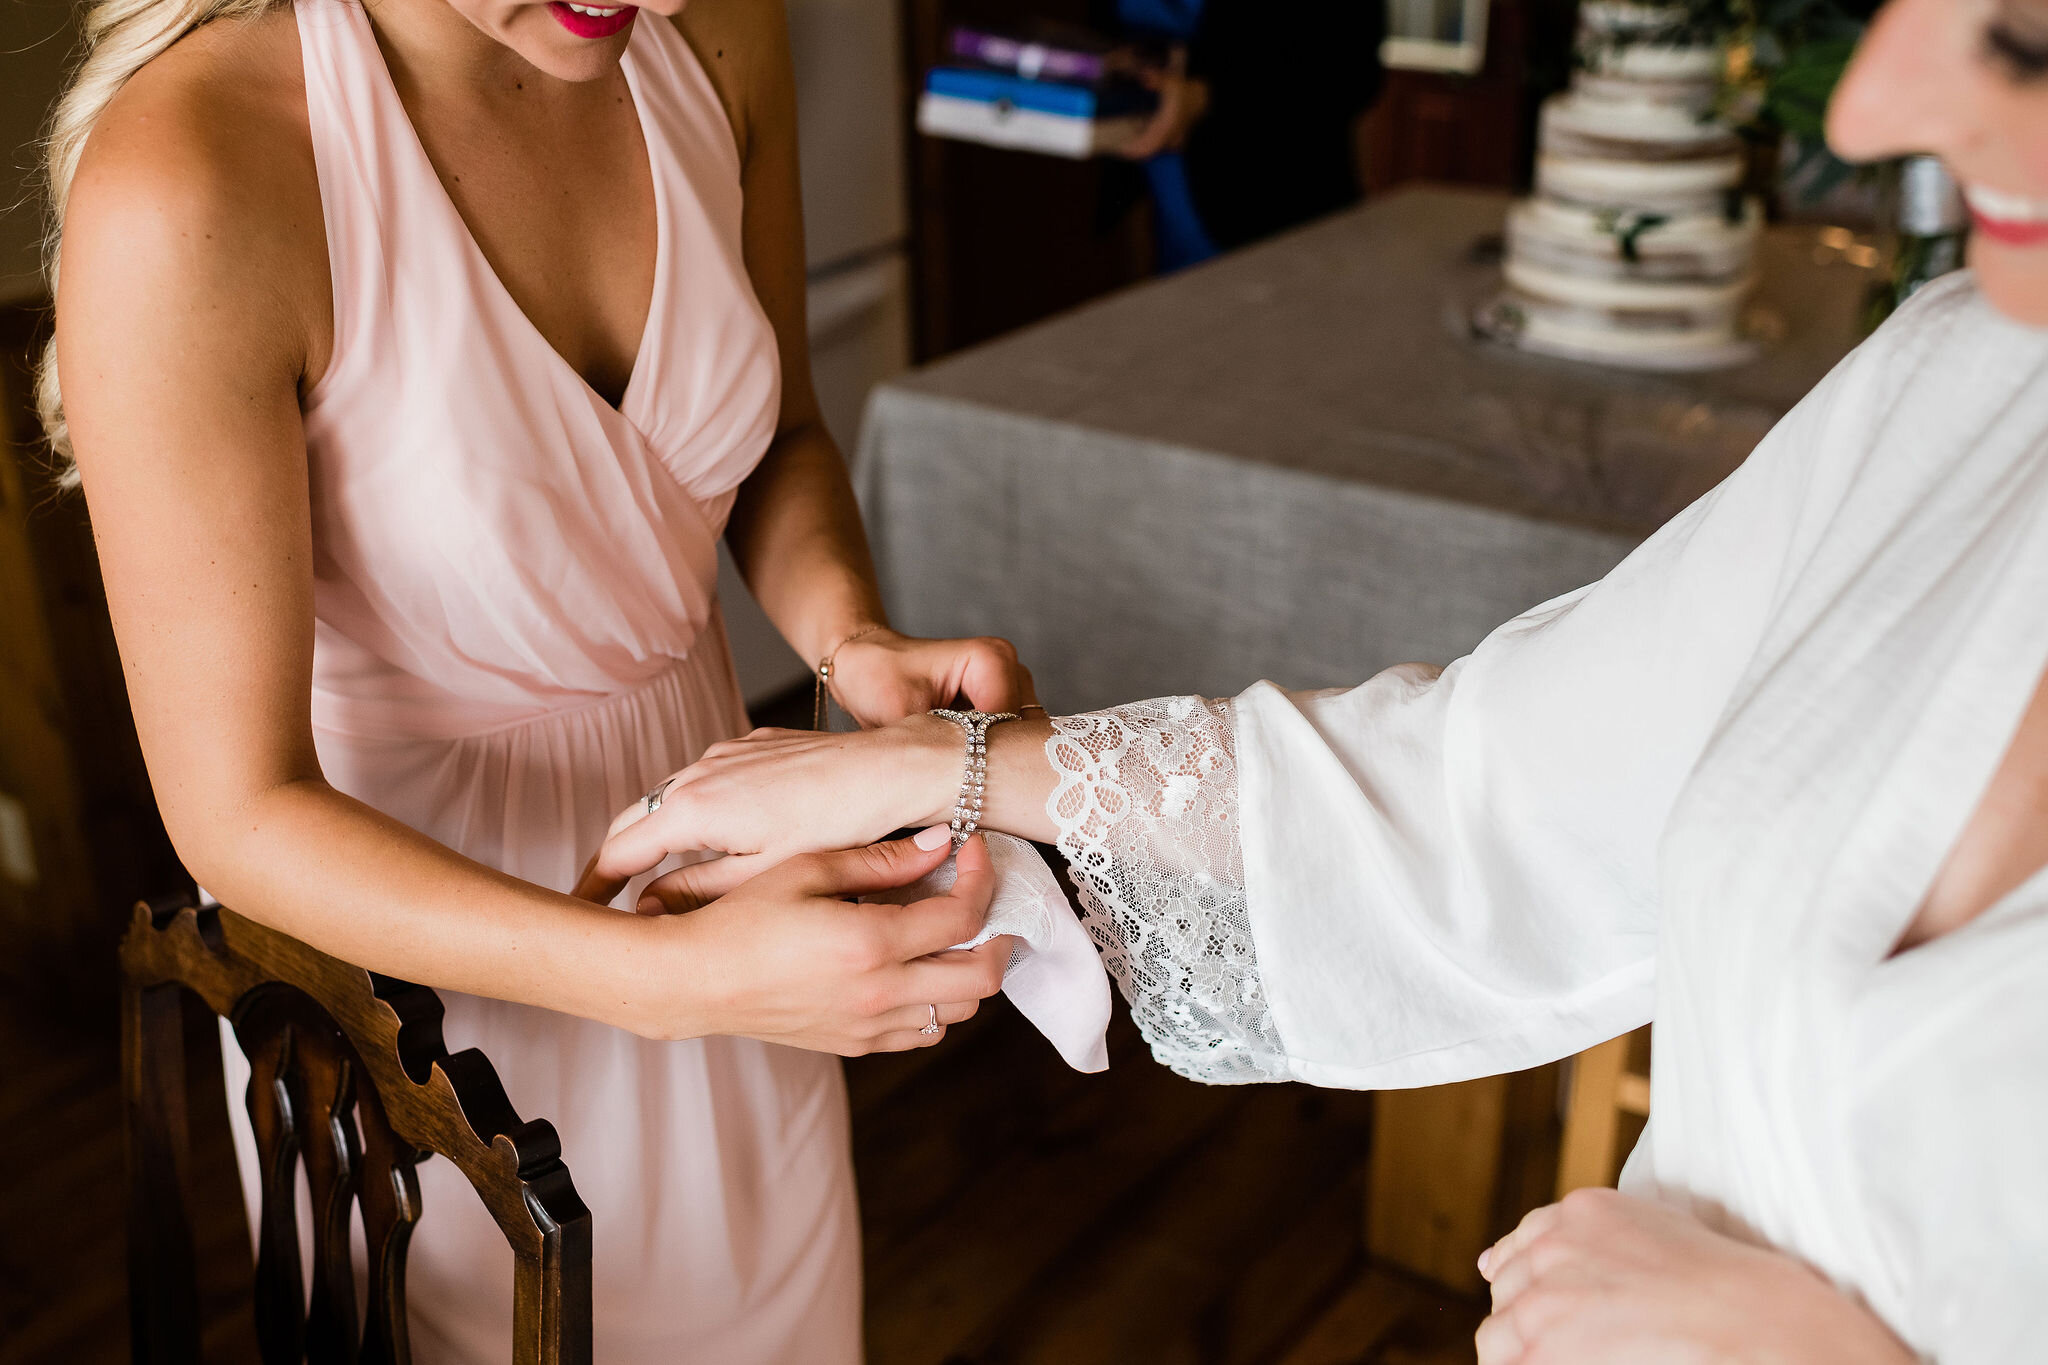 Maid of honor putting bride's bracelet on